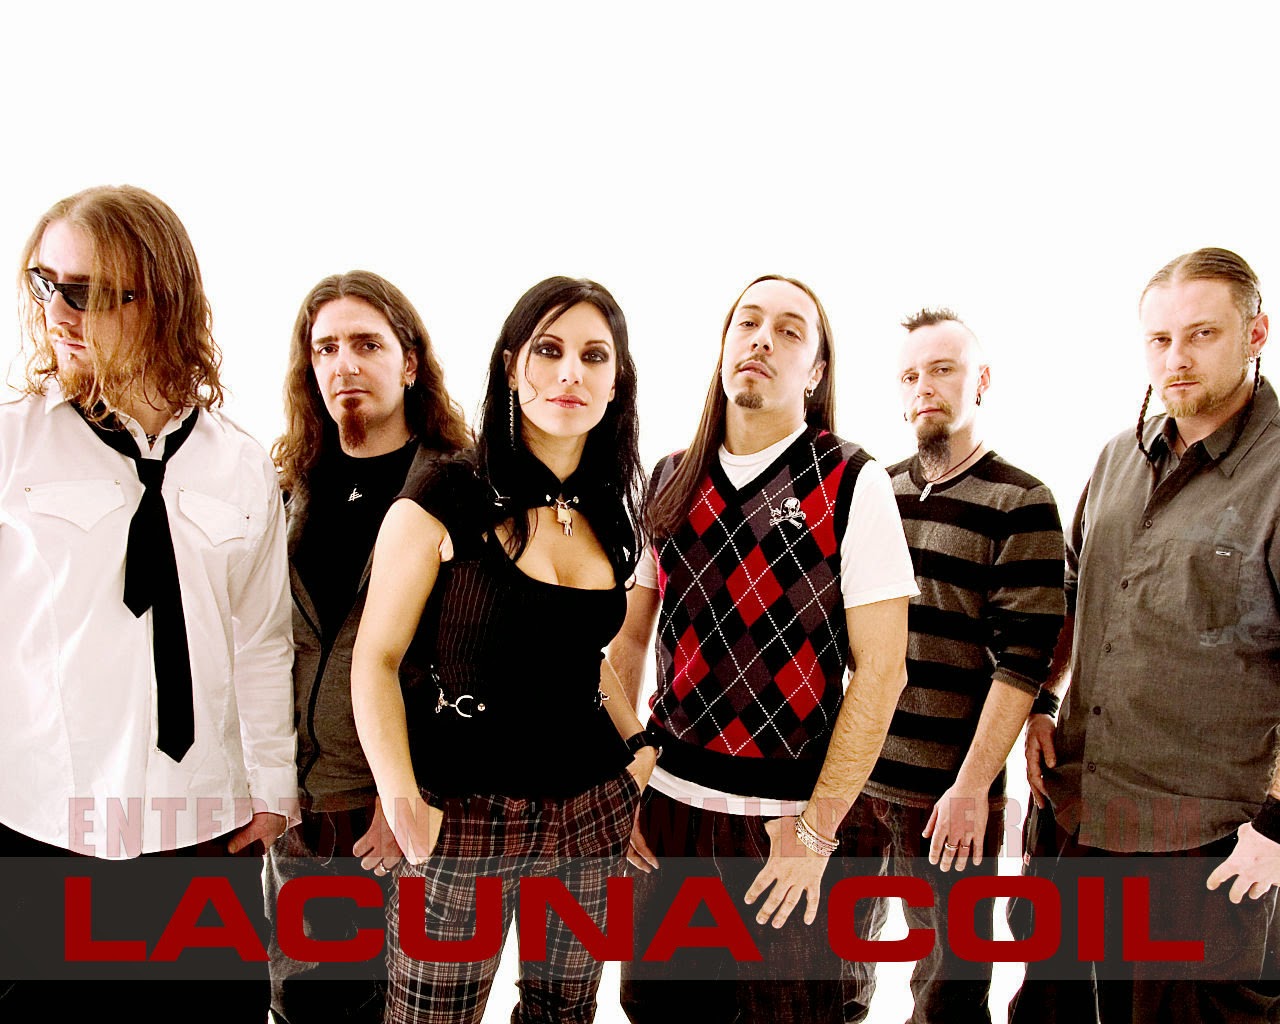 Lacuna Coil is an Italian metal band from Milan. Since their formation in 1994, the group has had two name changes, being previously known as Sleep of Right and Ethereal. http://www.jinglejanglejungle.net/2015/02/eu4.html #LacunaCoil